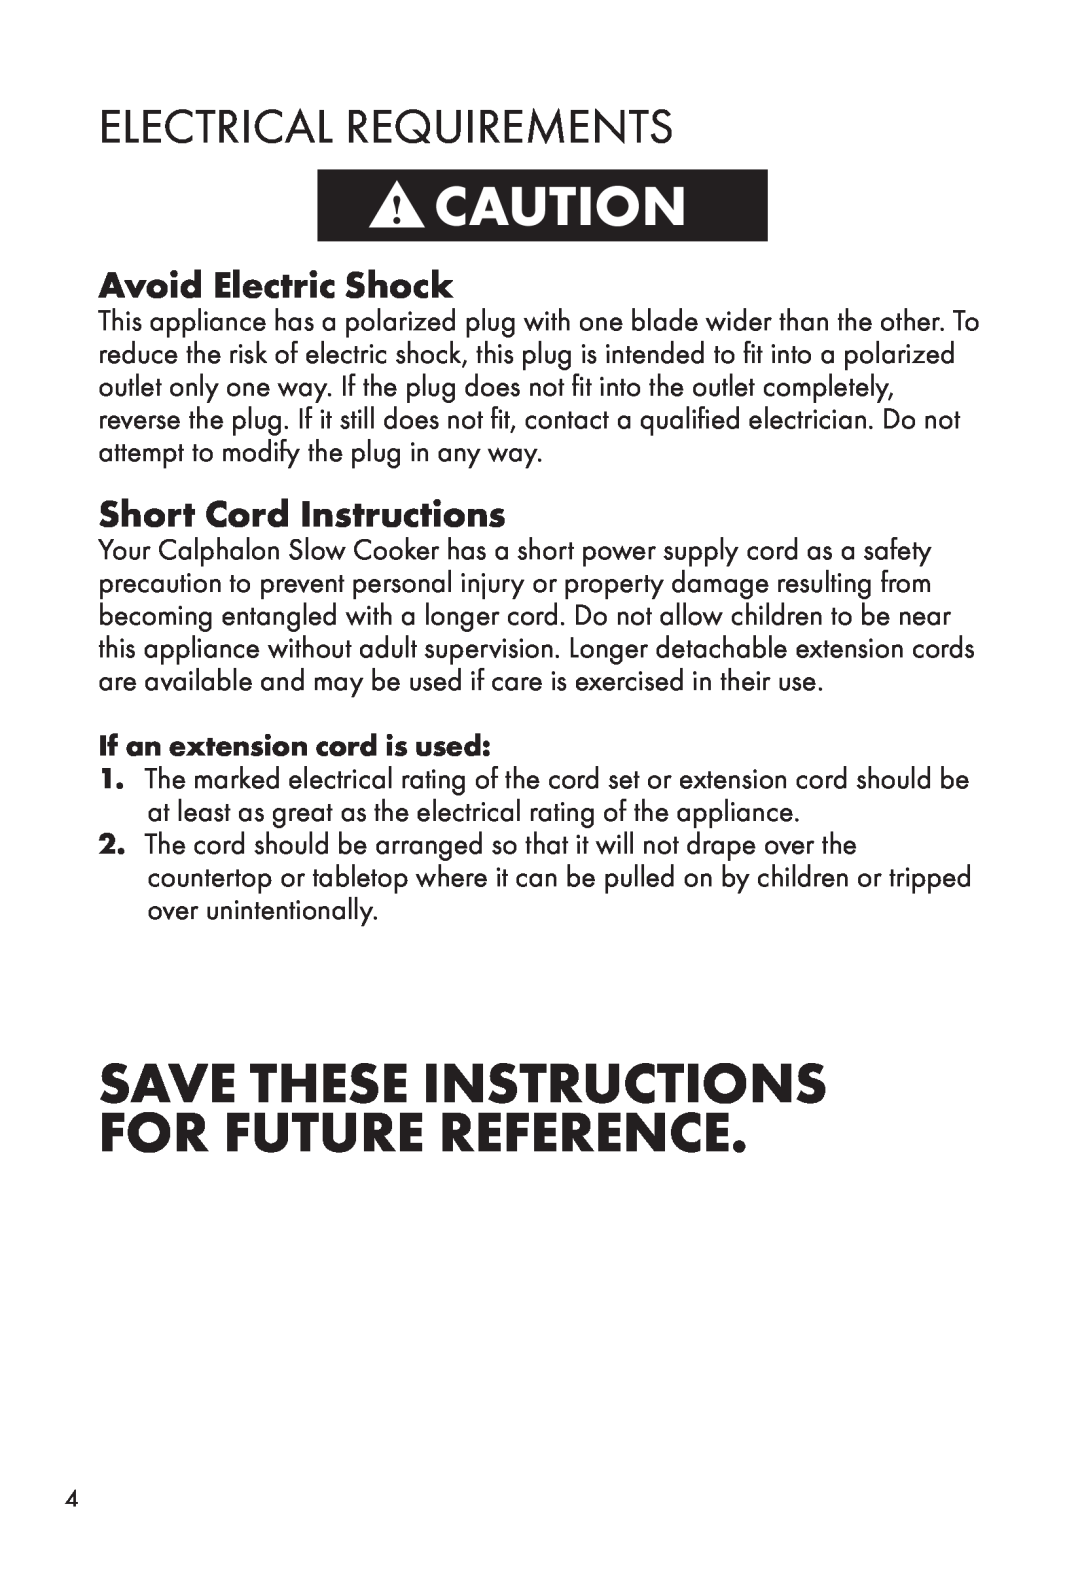 Calphalon HE400SC Electrical Requirements, Avoid Electric Shock, Short Cord Instructions, If an extension cord is used 